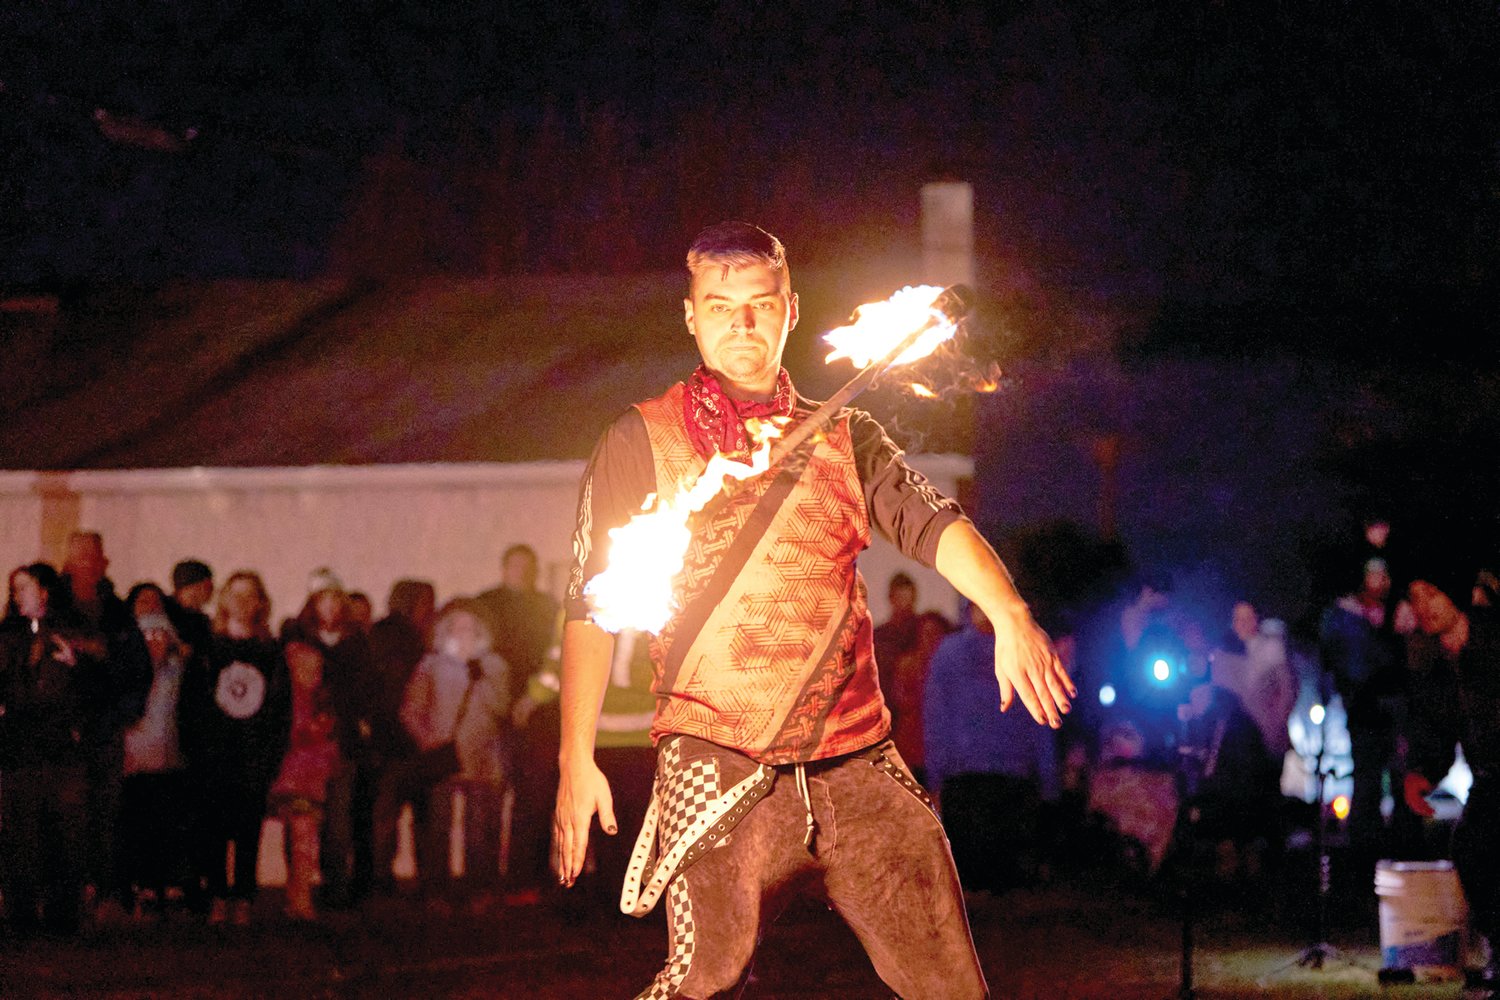 Stephen Haines, of Philadelphia, performs at Bristol’s Mill Street Fire & Ice Event.